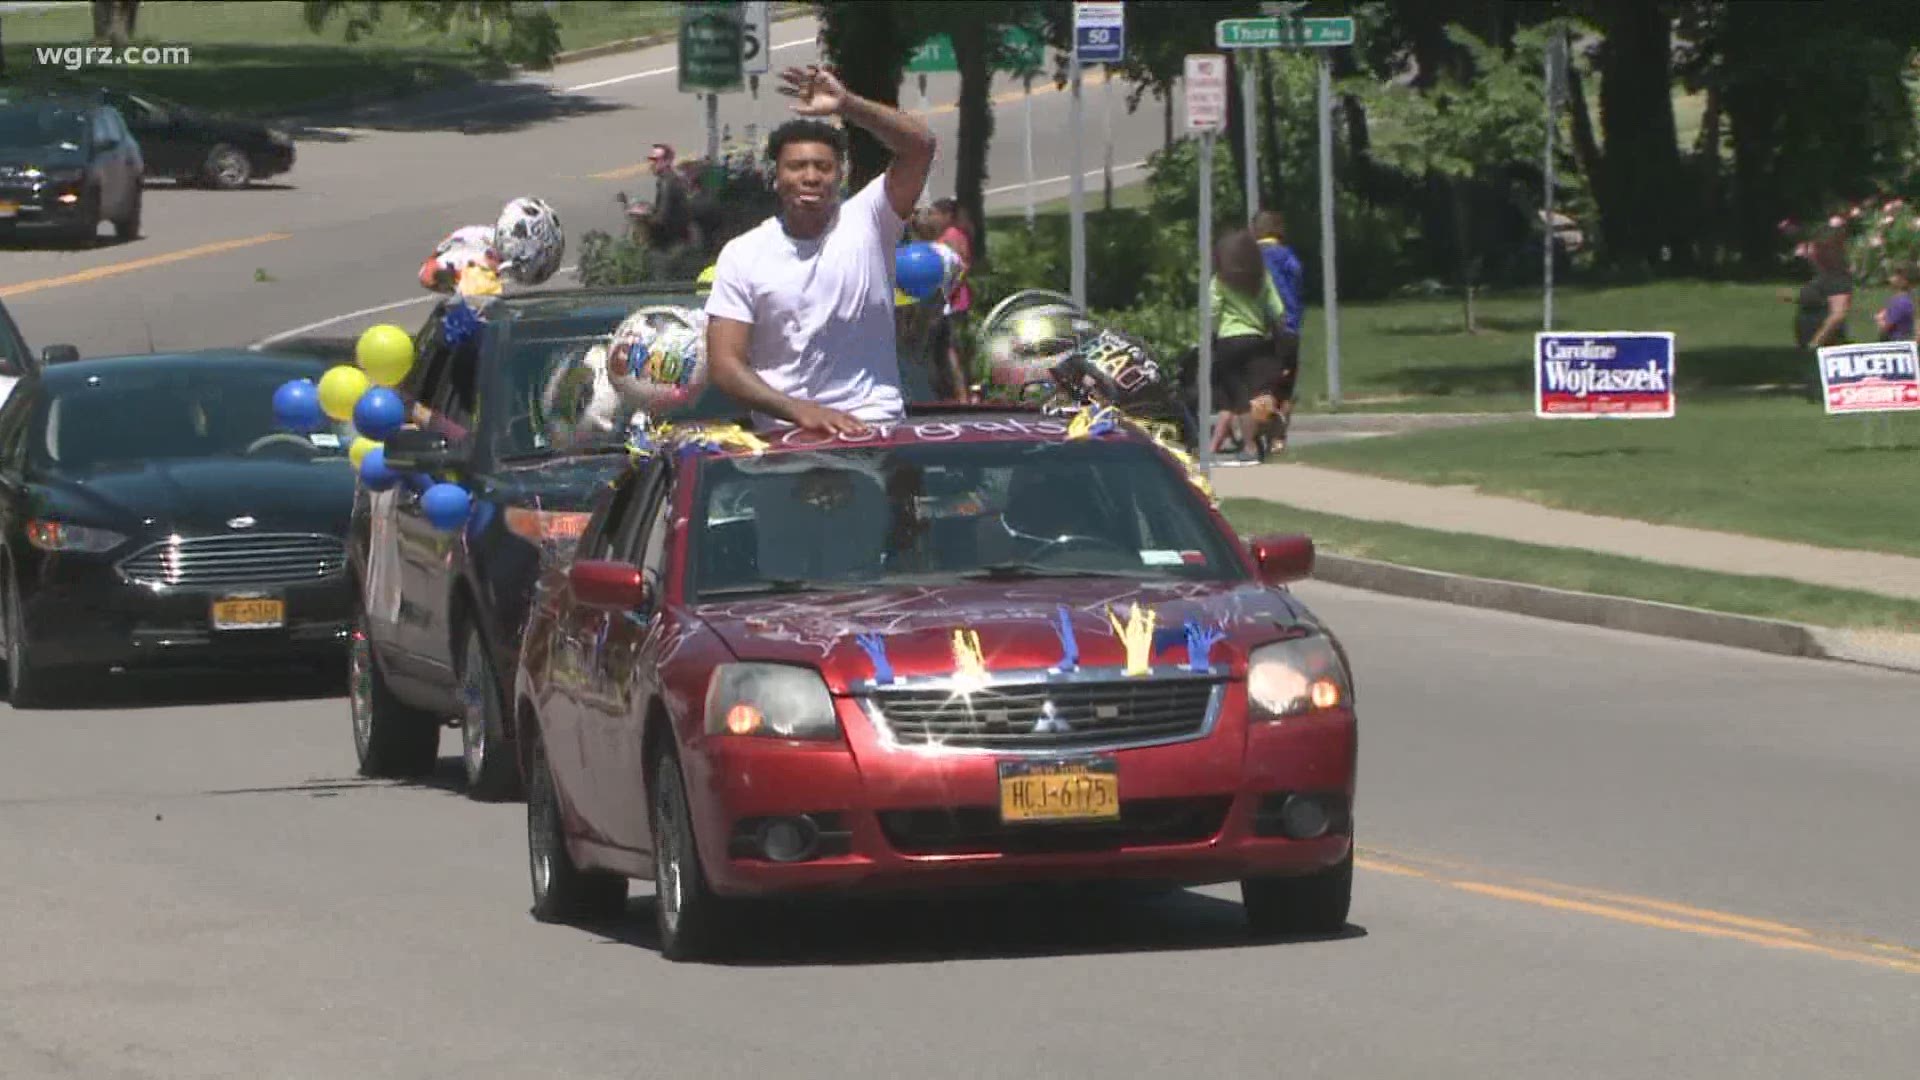 We got celebrations like this one in Niagara Falls today, a senior class parade with a long line of decorated cars driving through the community.